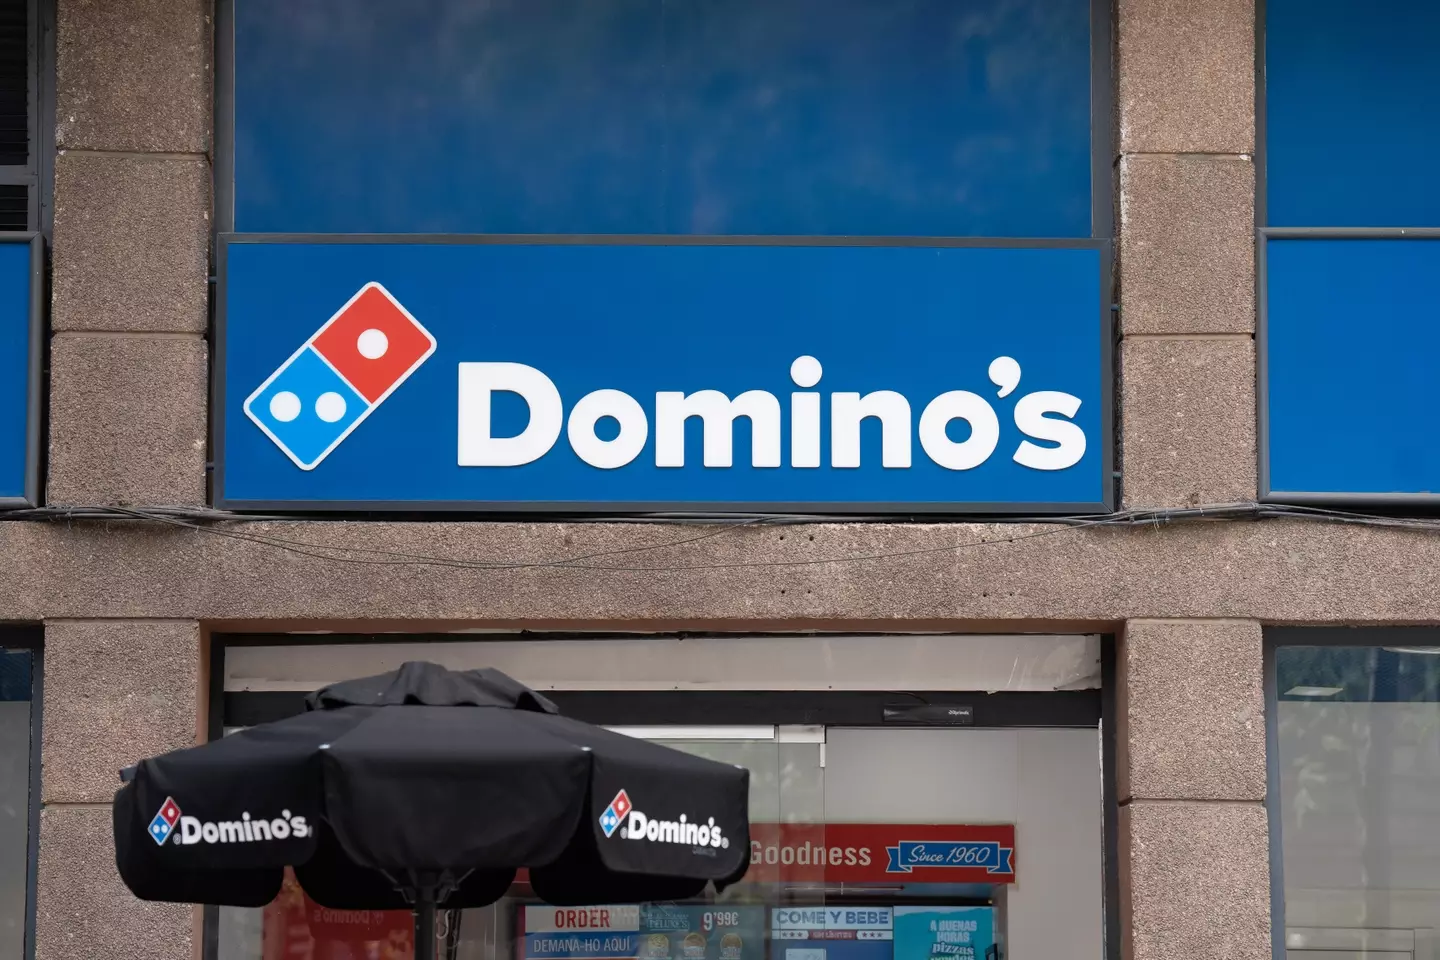 Customers can request an 'Emergency Pizza' through Domino's Rewards.